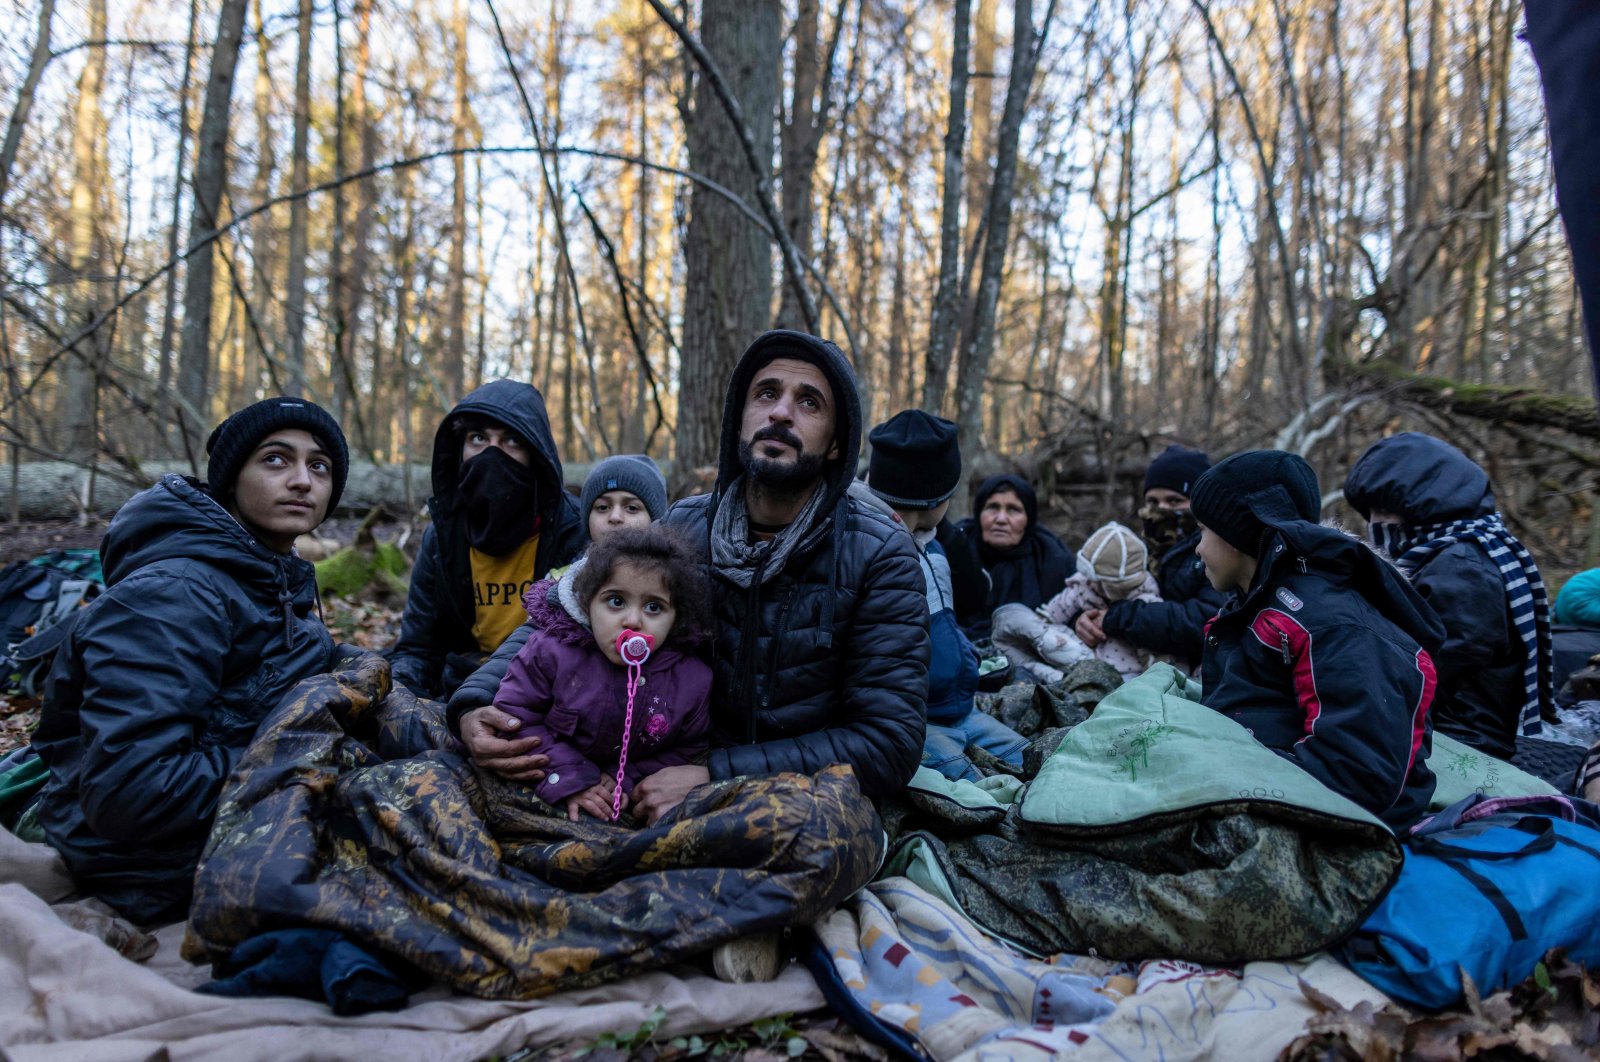 Members of a Kurdish family from Dohuk in Iraq are seen in a forest near the Polish-Belarus border while waiting for the border guard patrol, near Narewka, Poland, on Nov. 9, 2021. (AFP Photo)